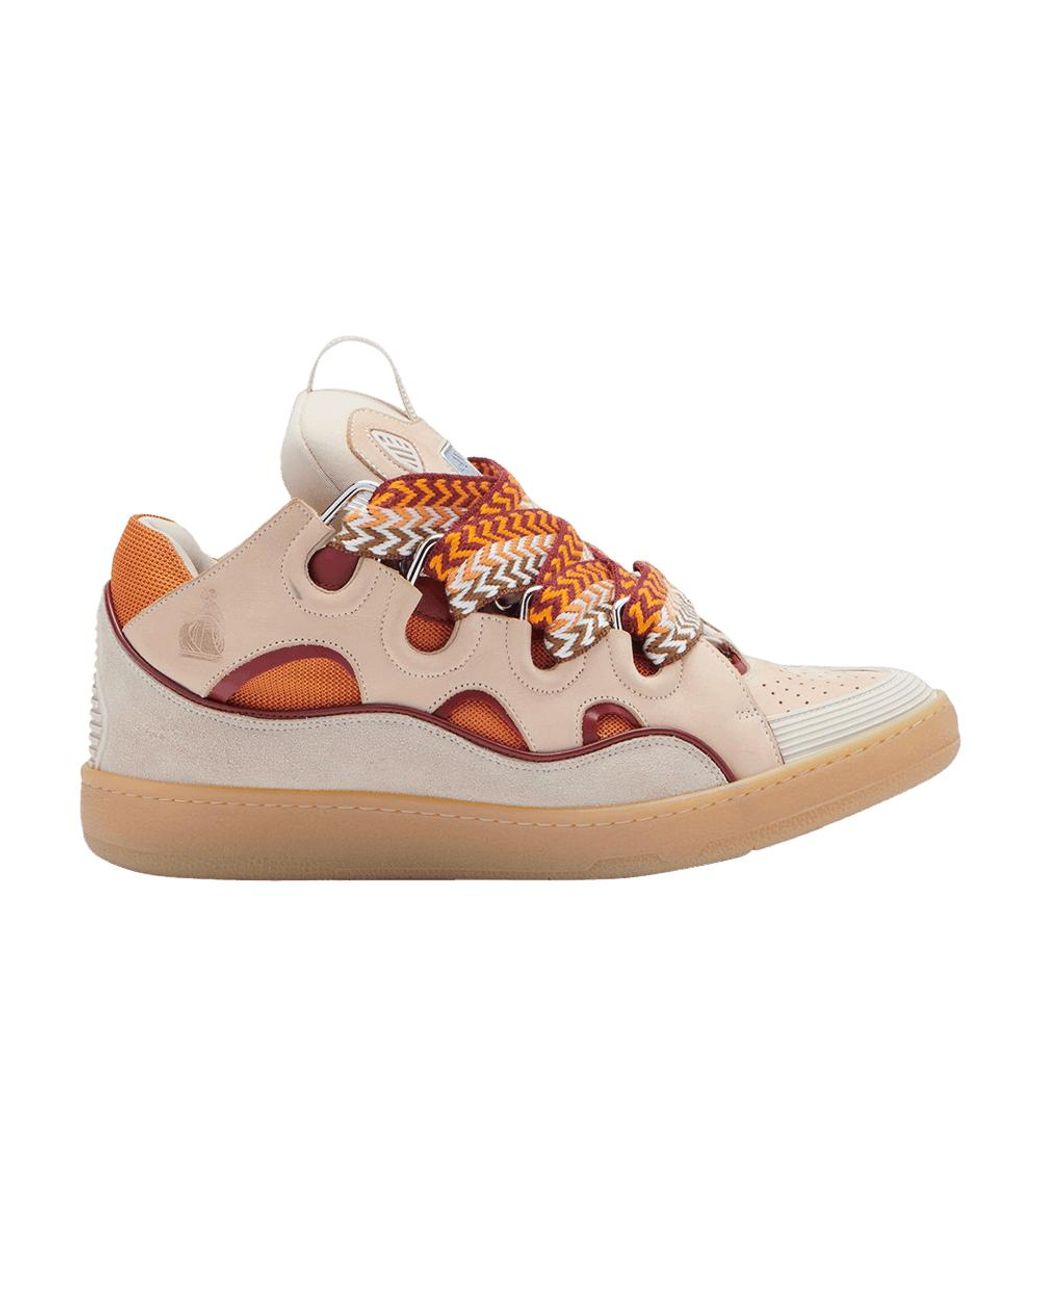 Lanvin Leather Curb Sneakers Pale Pink, Mango for Men | Lyst